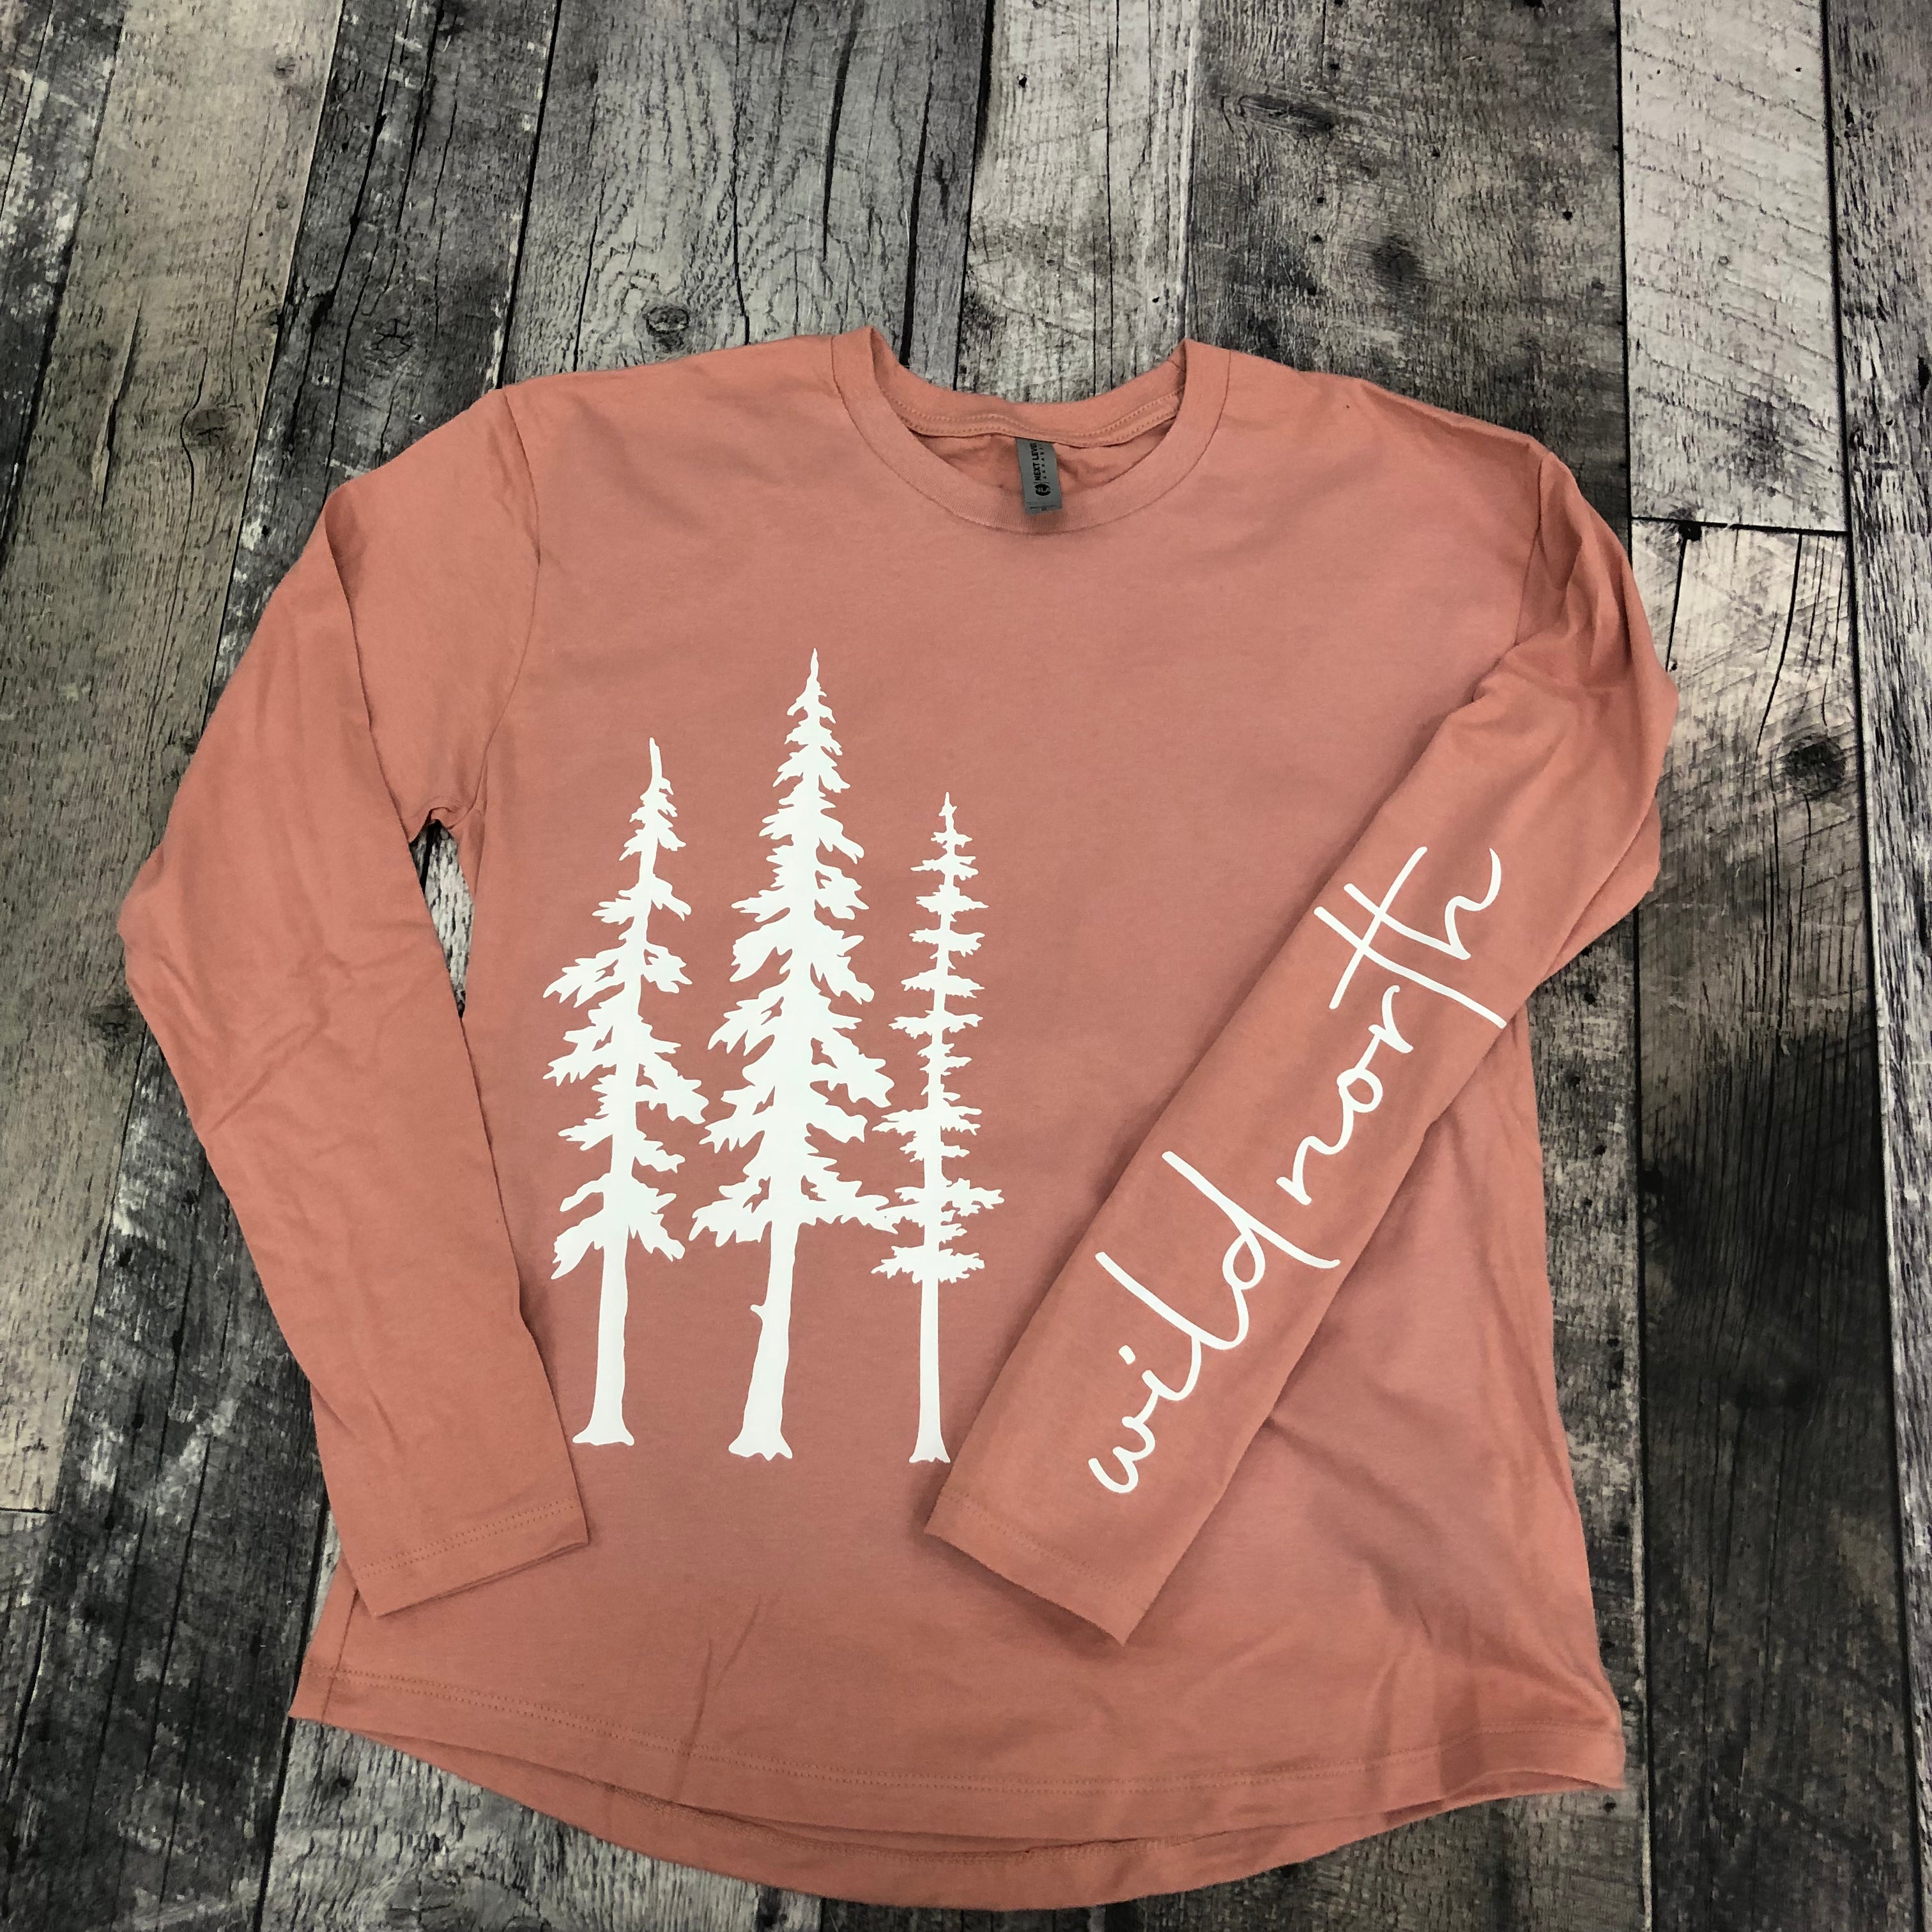 Ladies' Relaxed Long Sleeve T-Shirt